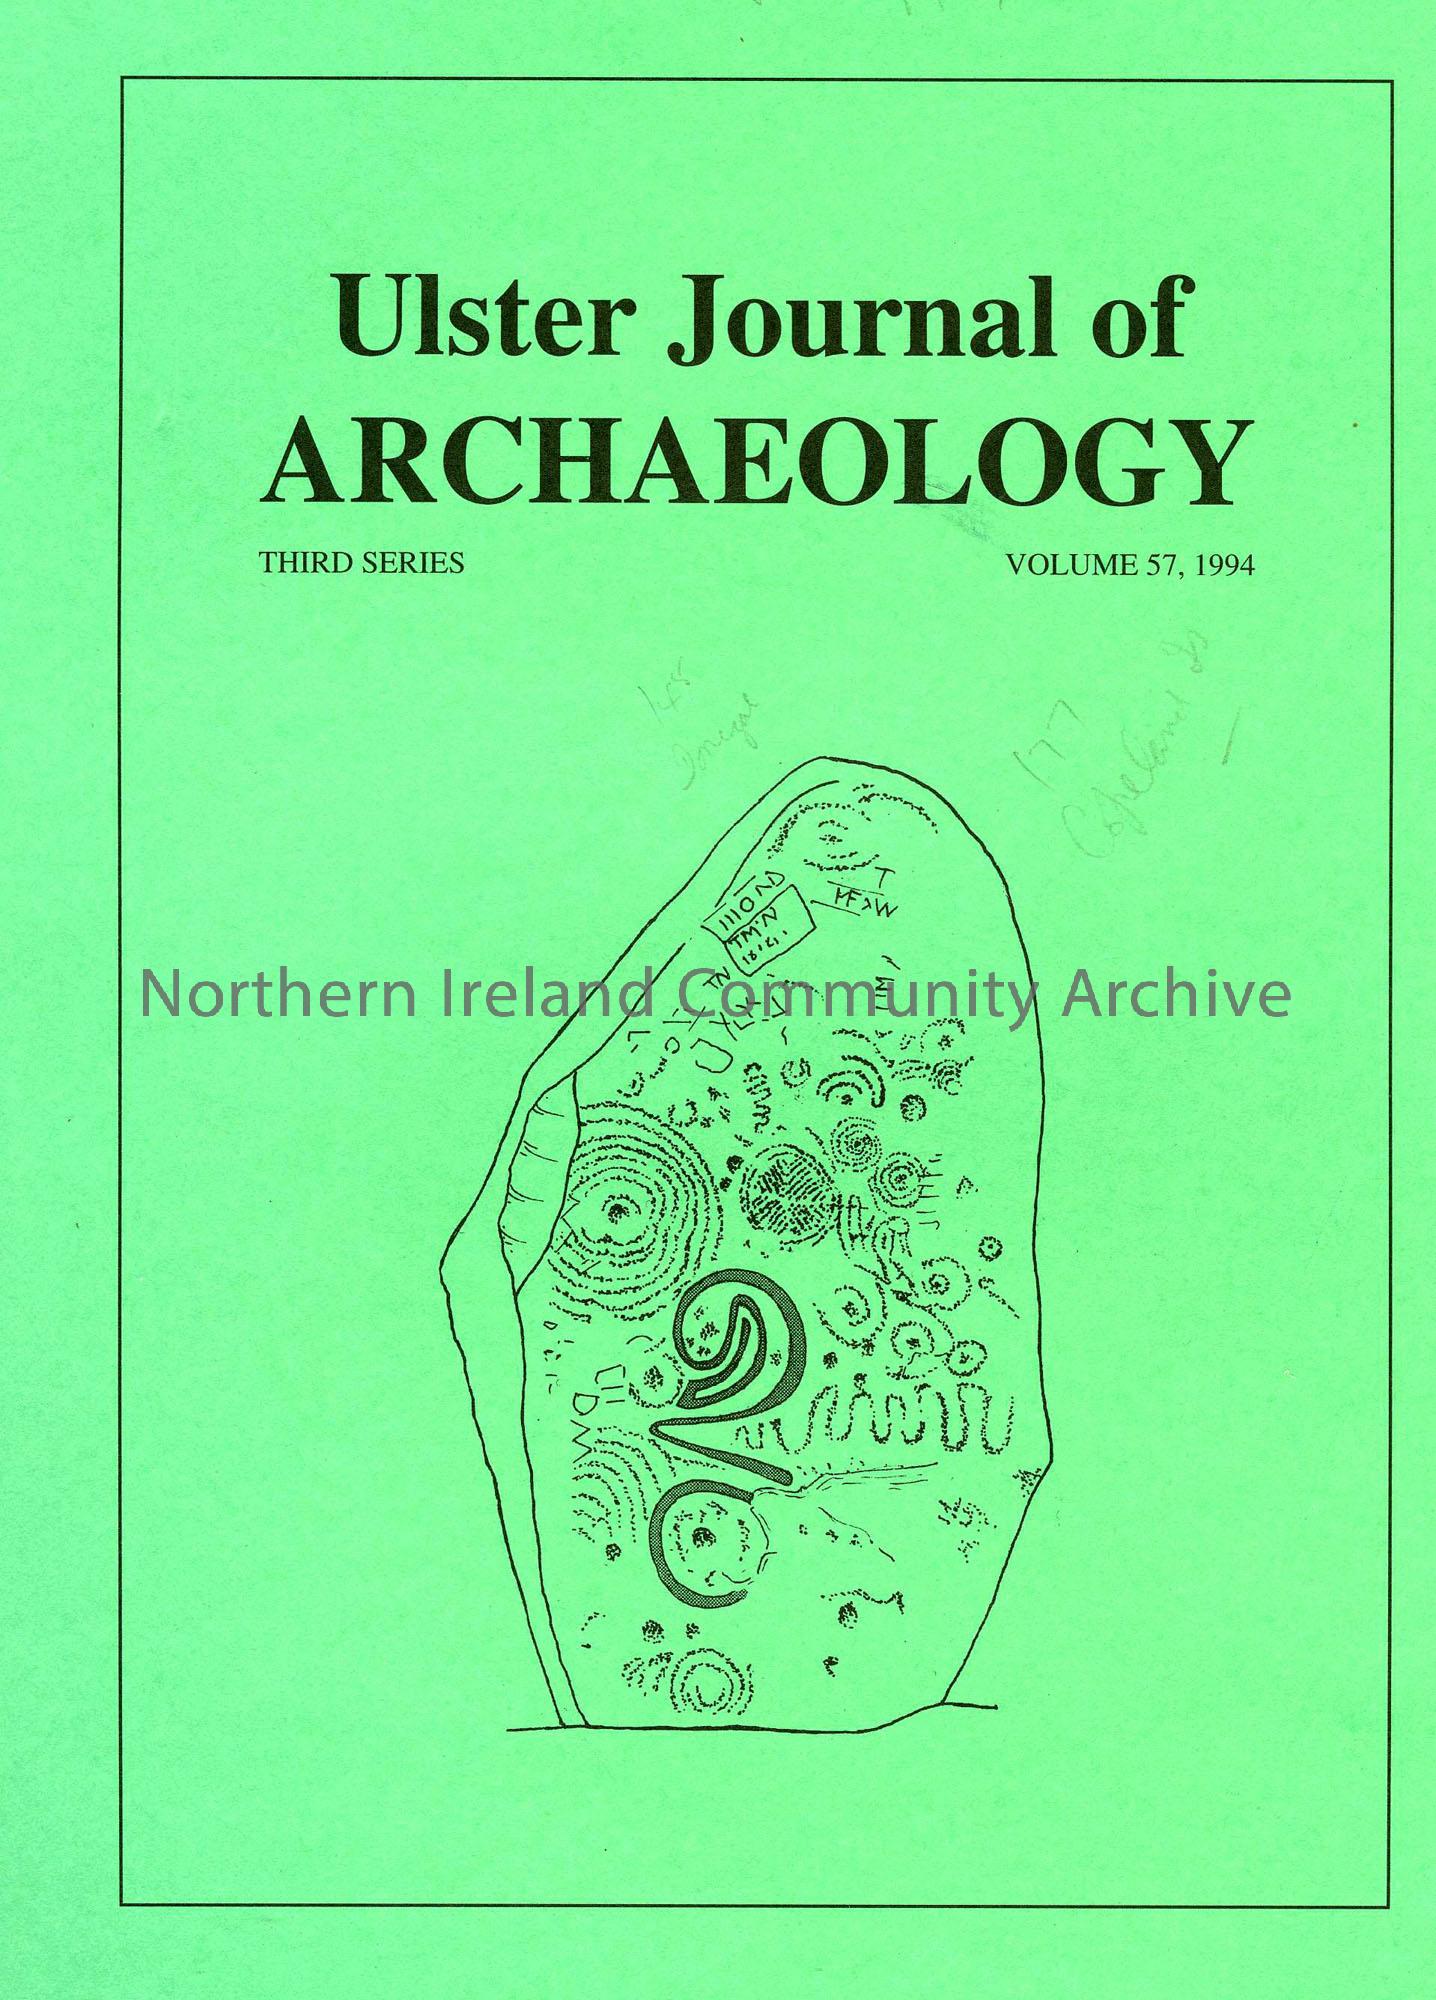 book titled, Ulster Journal of Archaeology. Third Series Volume 57, 1994 (3762)